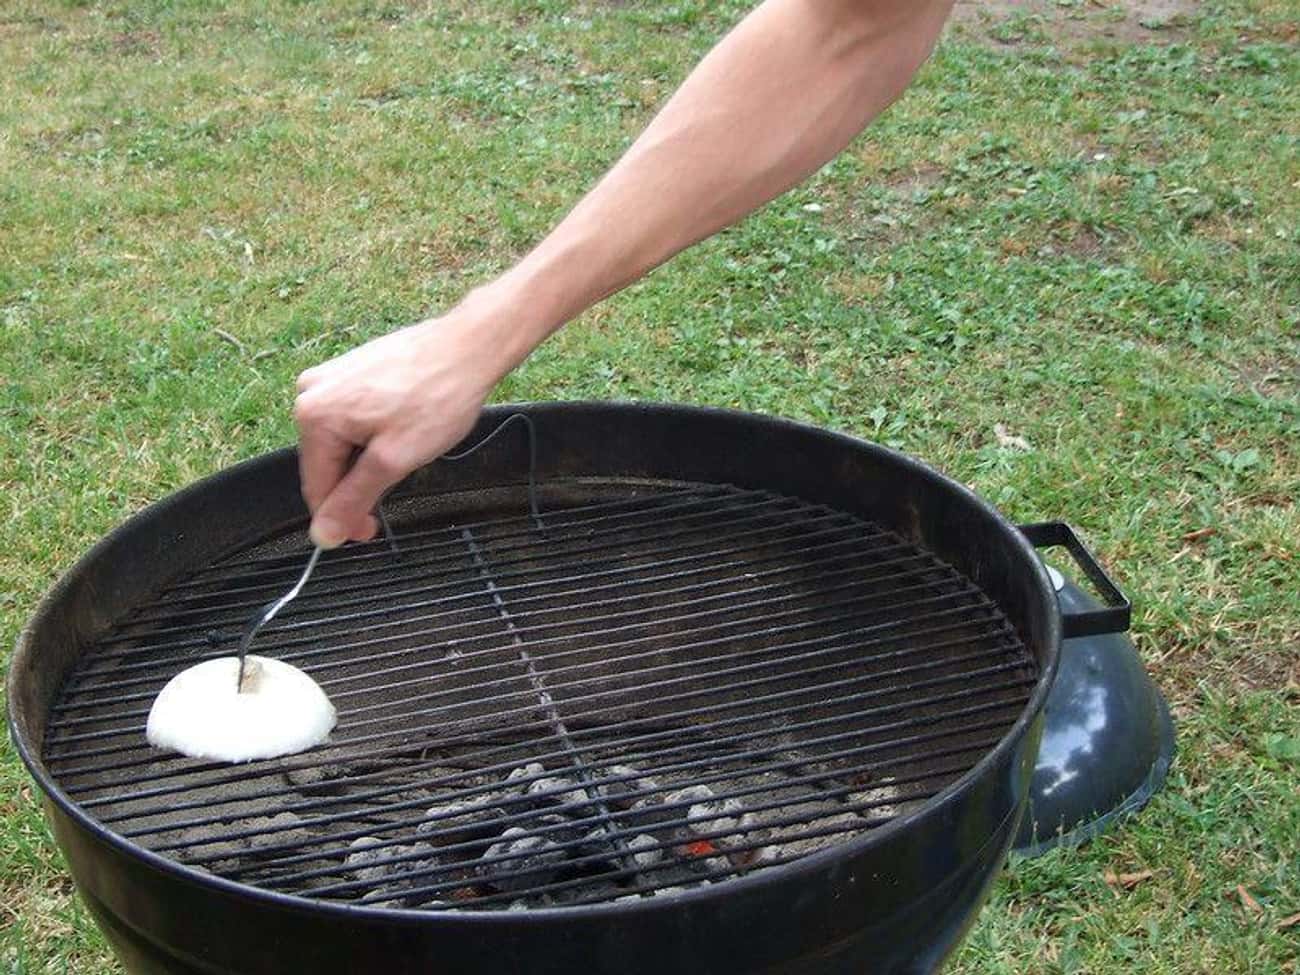 Clean The Grill With An Onion